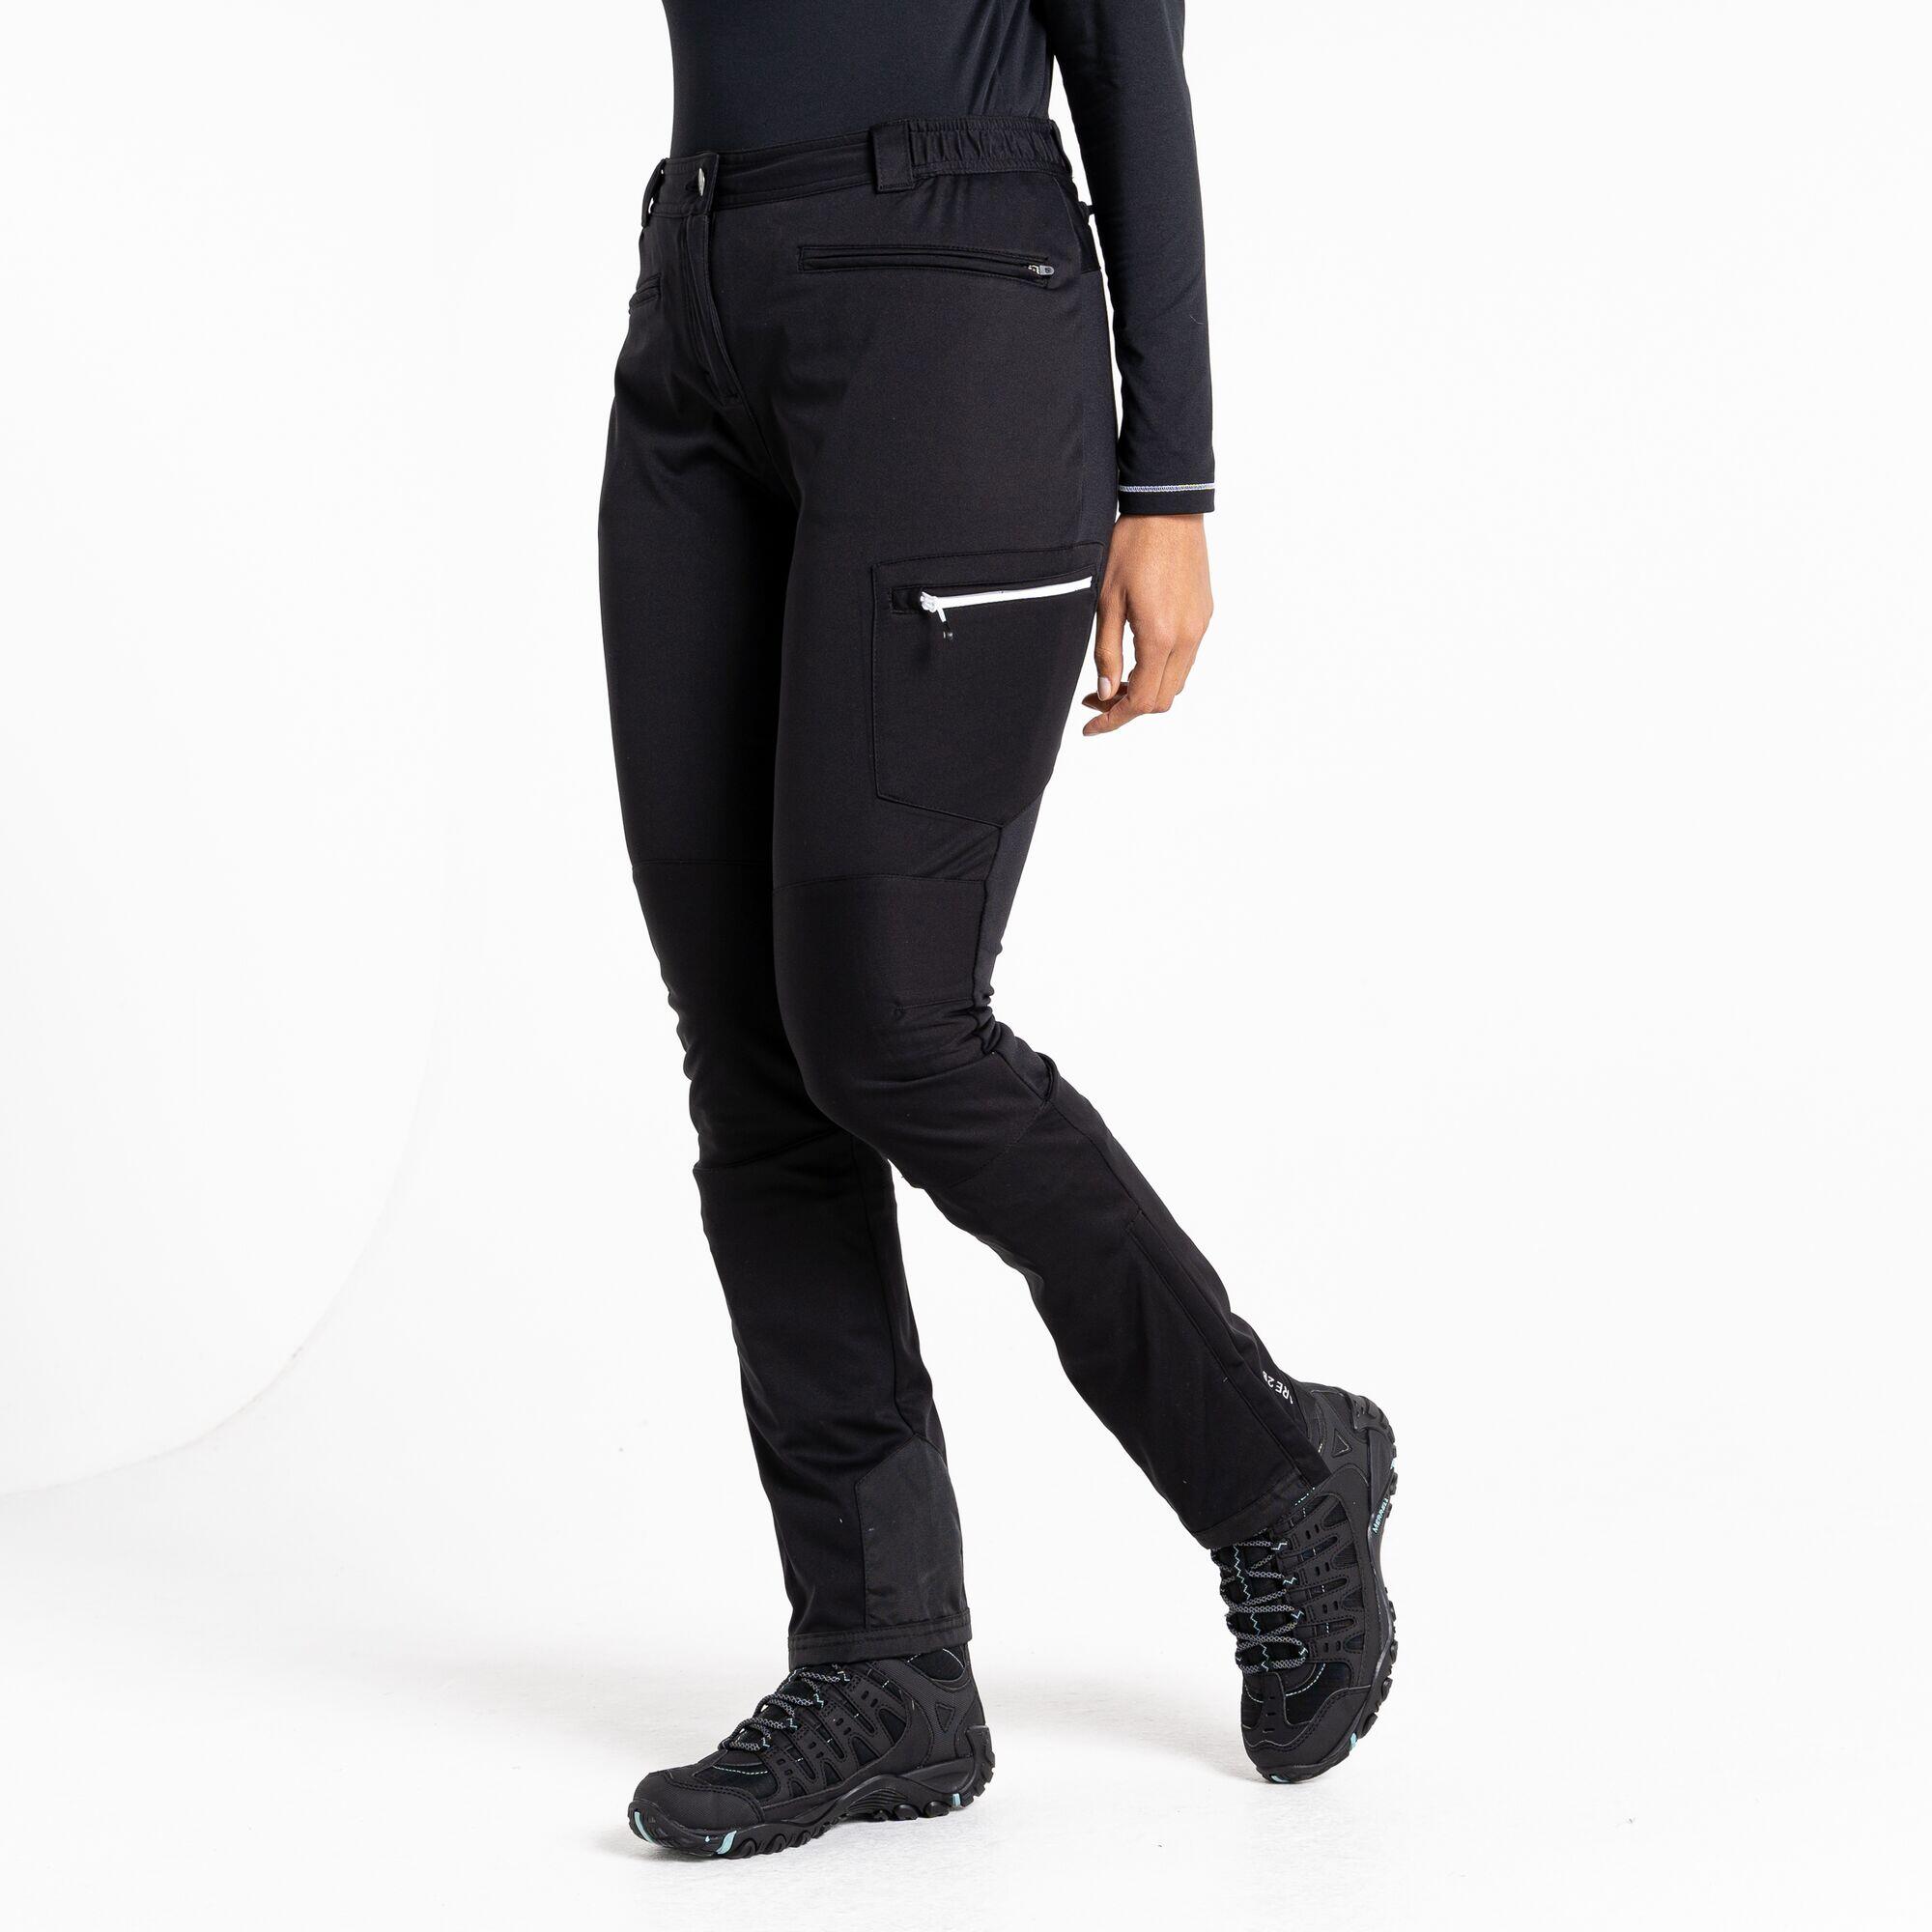 Appended II Women's Hiking Trousers - Black 5/7